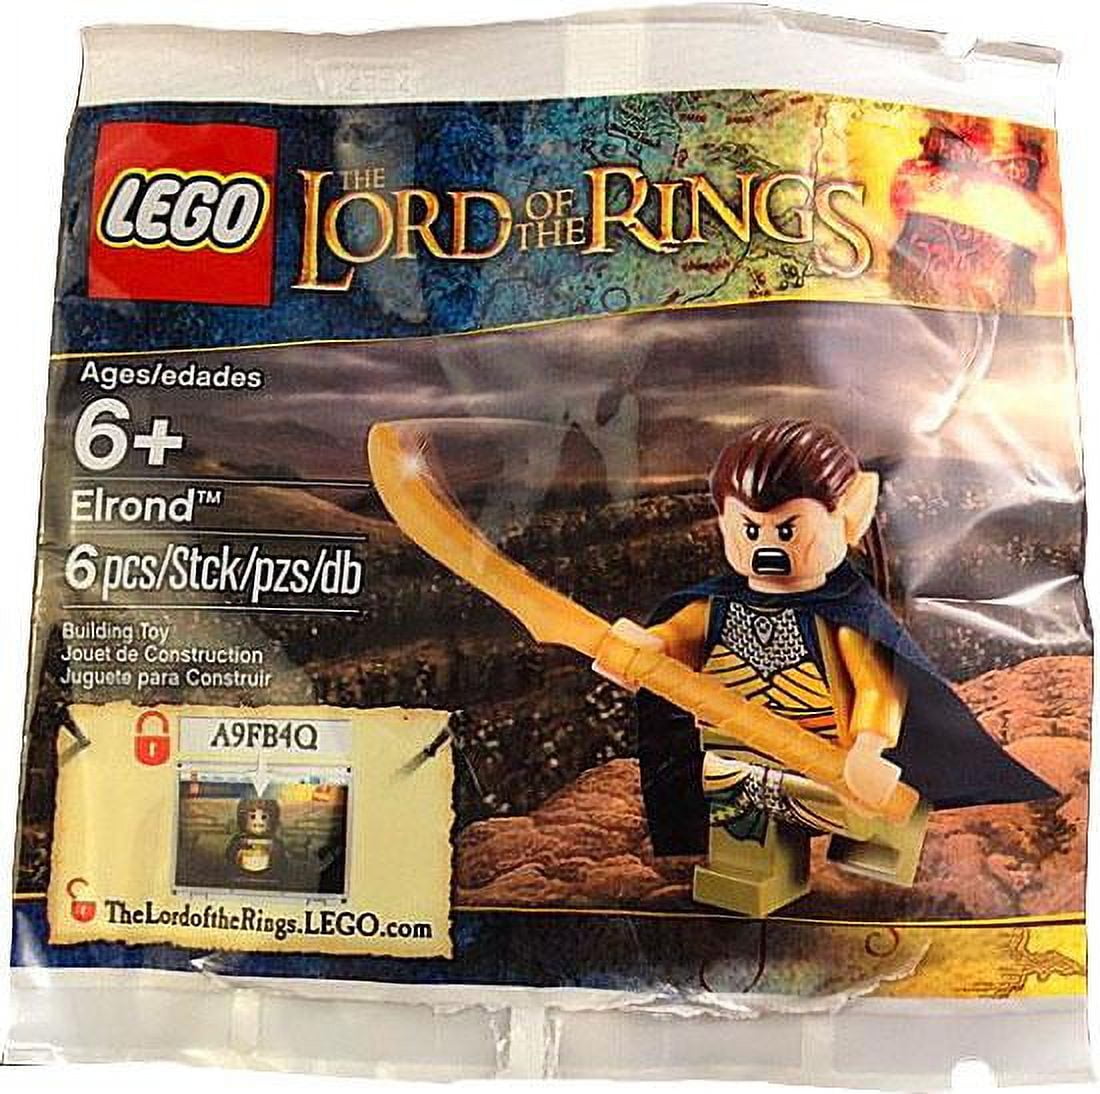 LEGO brings the Fellowship back together with the new The Lord of the Rings  10316 Rivendell set [News] - The Brothers Brick | The Brothers Brick